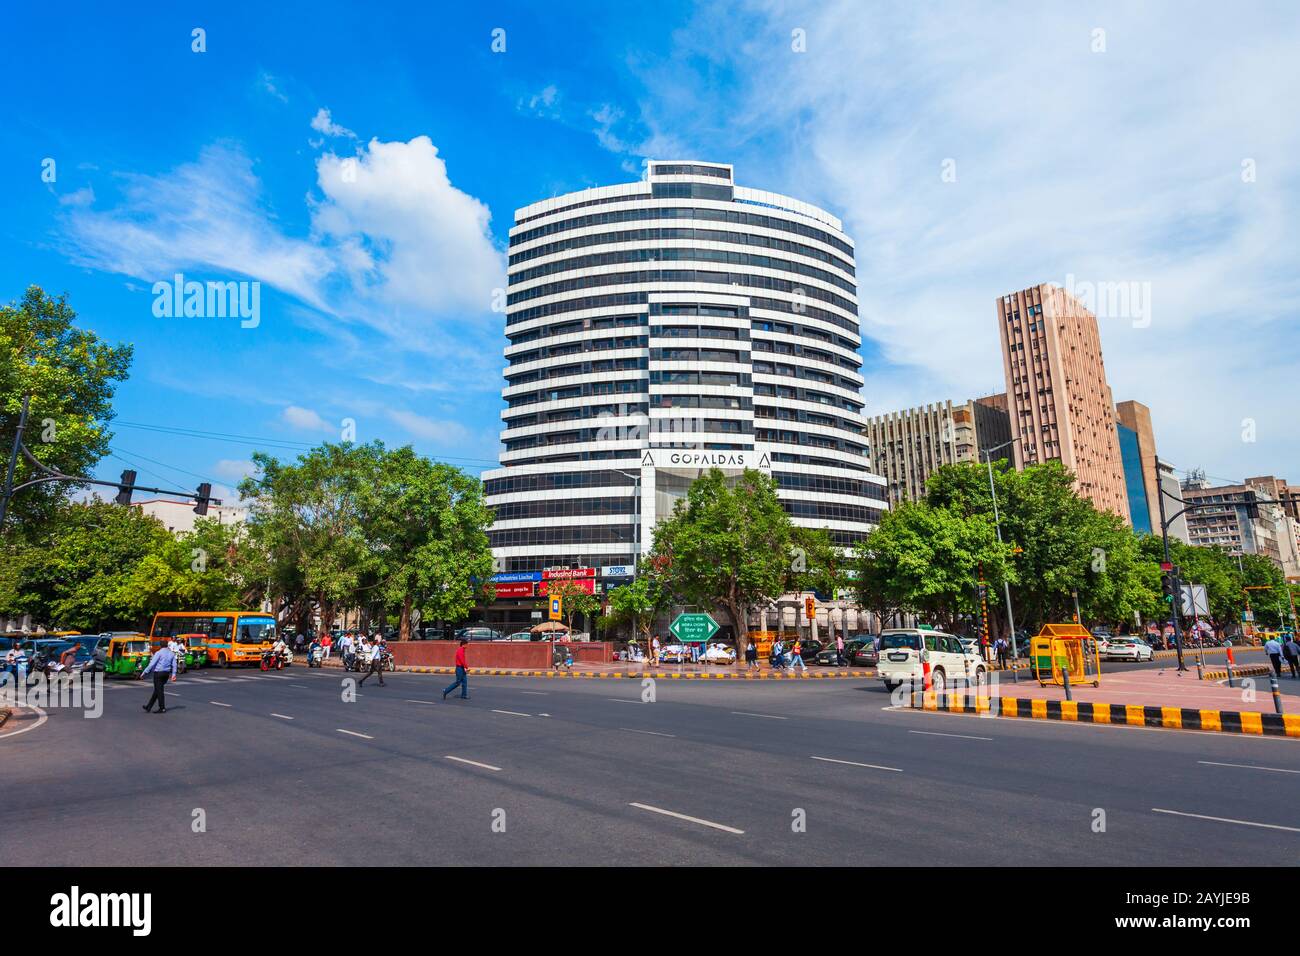 NEW DELHI, INDIA - SEPTEMBER 26, 2019: Gopaldas Ardee tower near the Connaught Place, the largest financial, commercial and business centres in New De Stock Photo